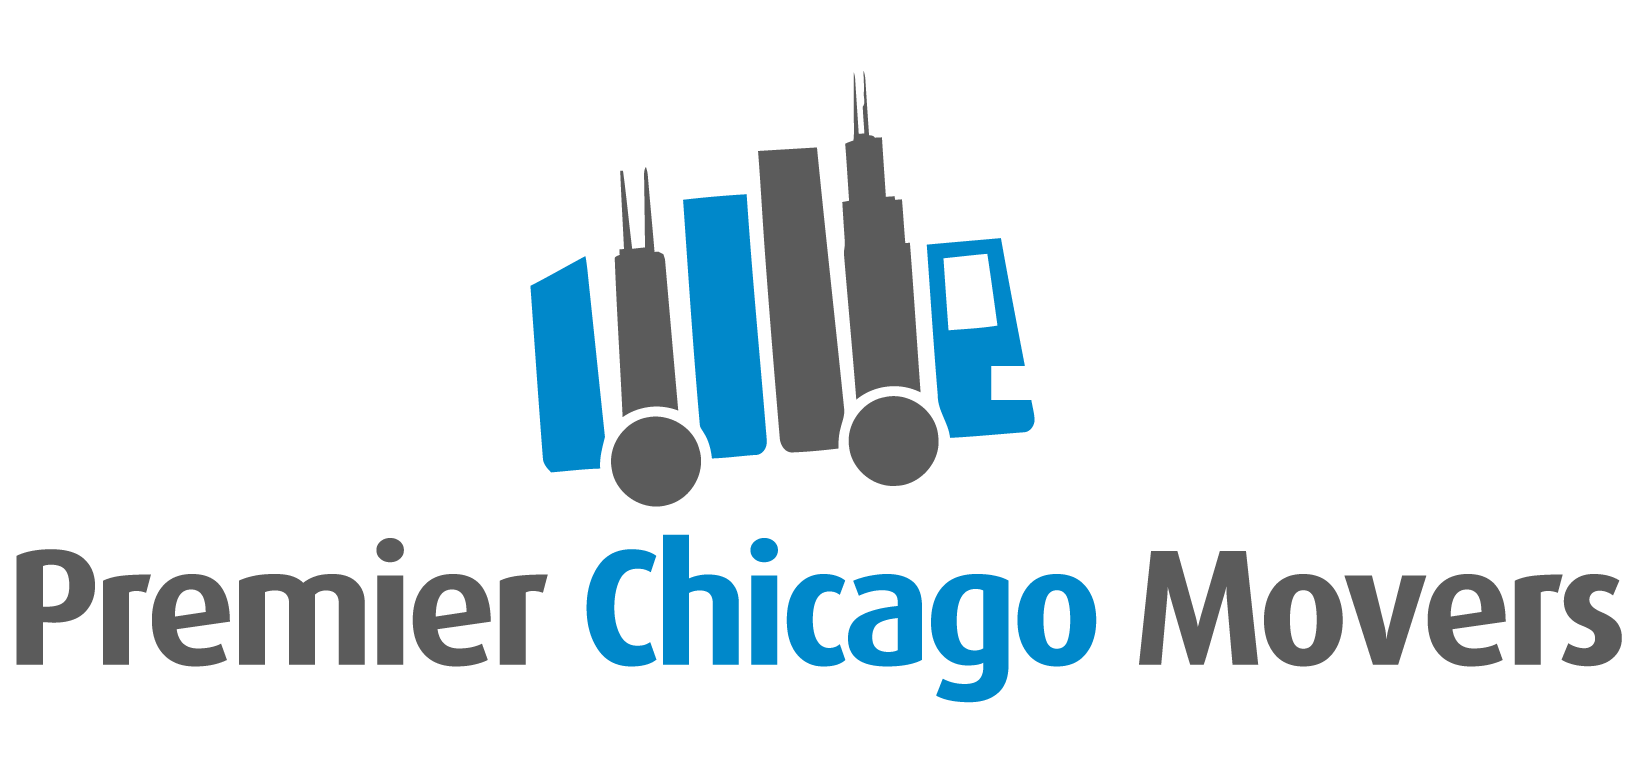 Premier Chicago Movers